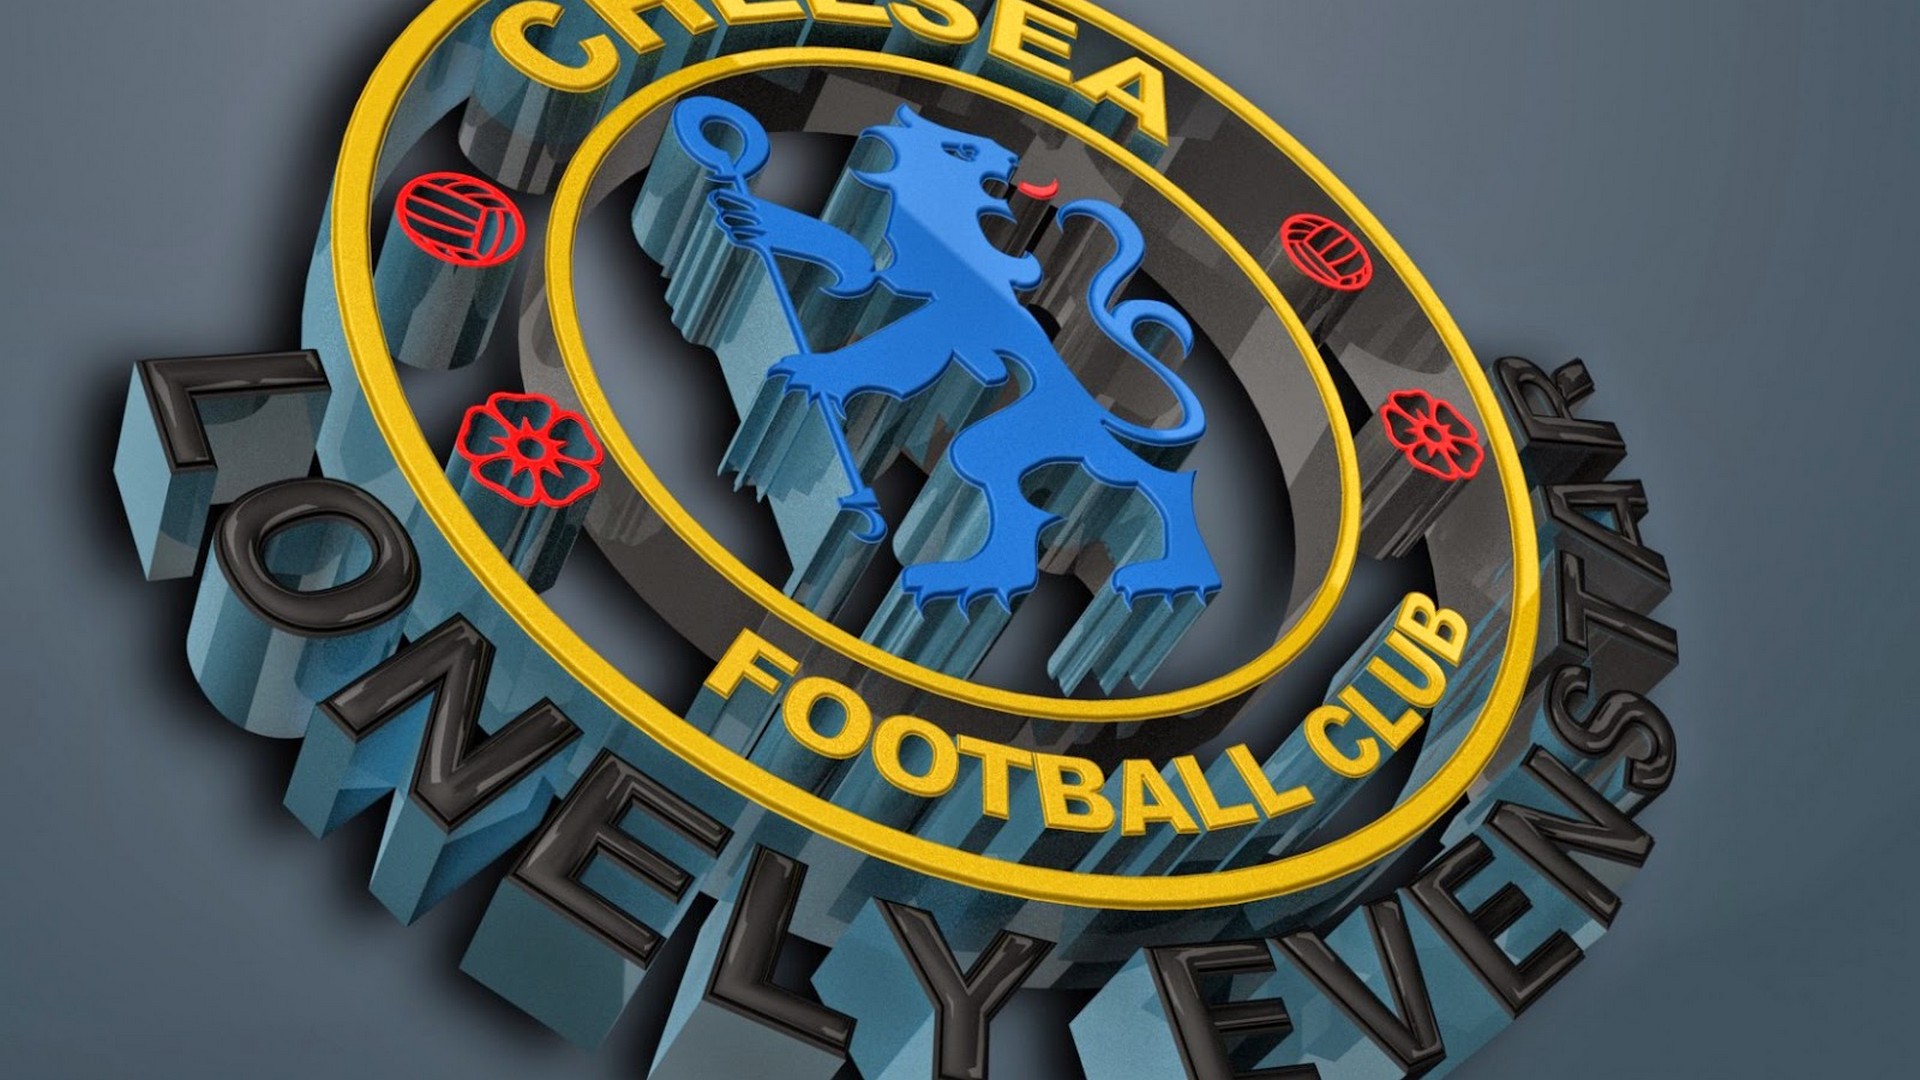 Wallpapers HD Chelsea London with resolution 1920x1080 pixel. You can make this wallpaper for your Mac or Windows Desktop Background, iPhone, Android or Tablet and another Smartphone device